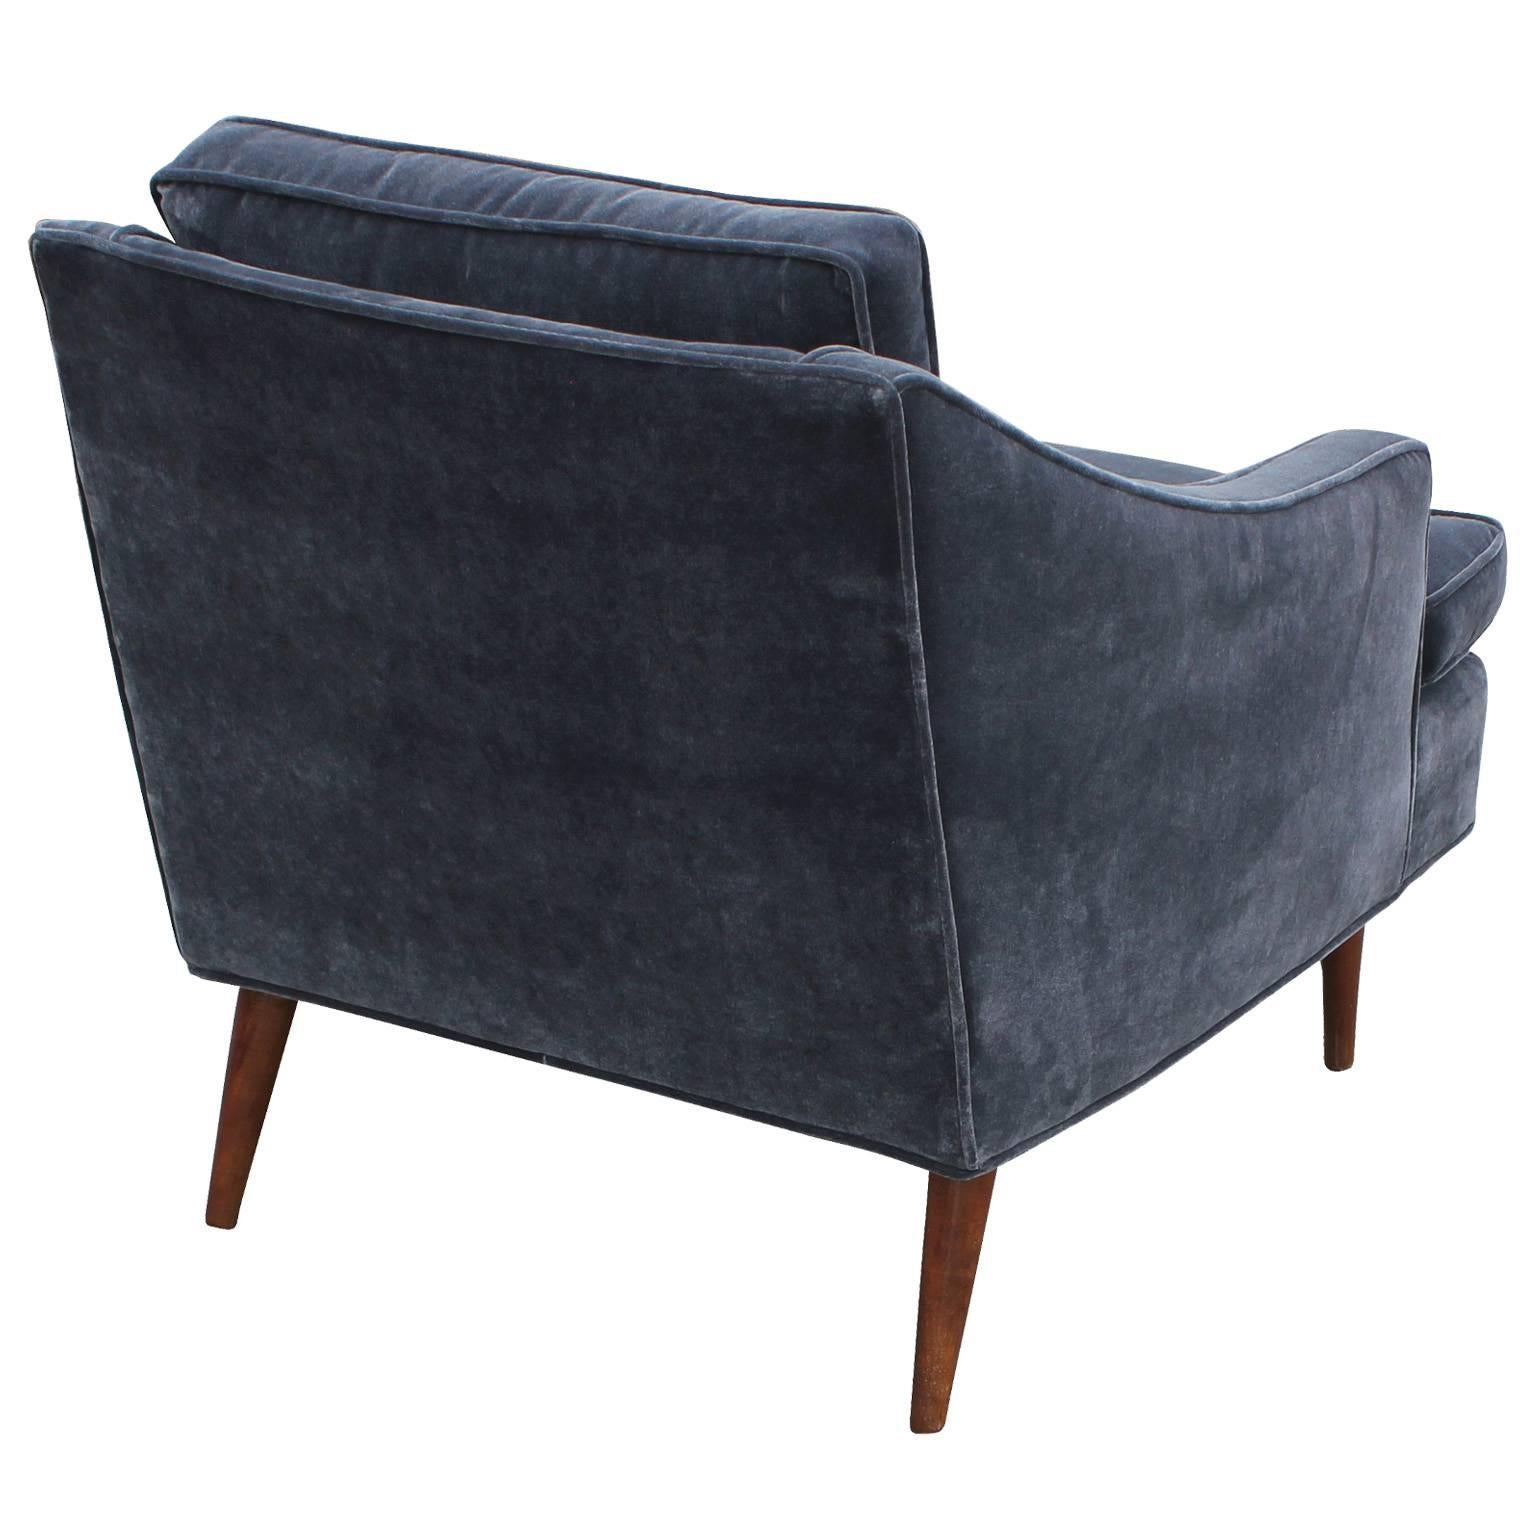 Wonderful Pair of Curved Grey Velvet Tufted Lounge Chairs 1